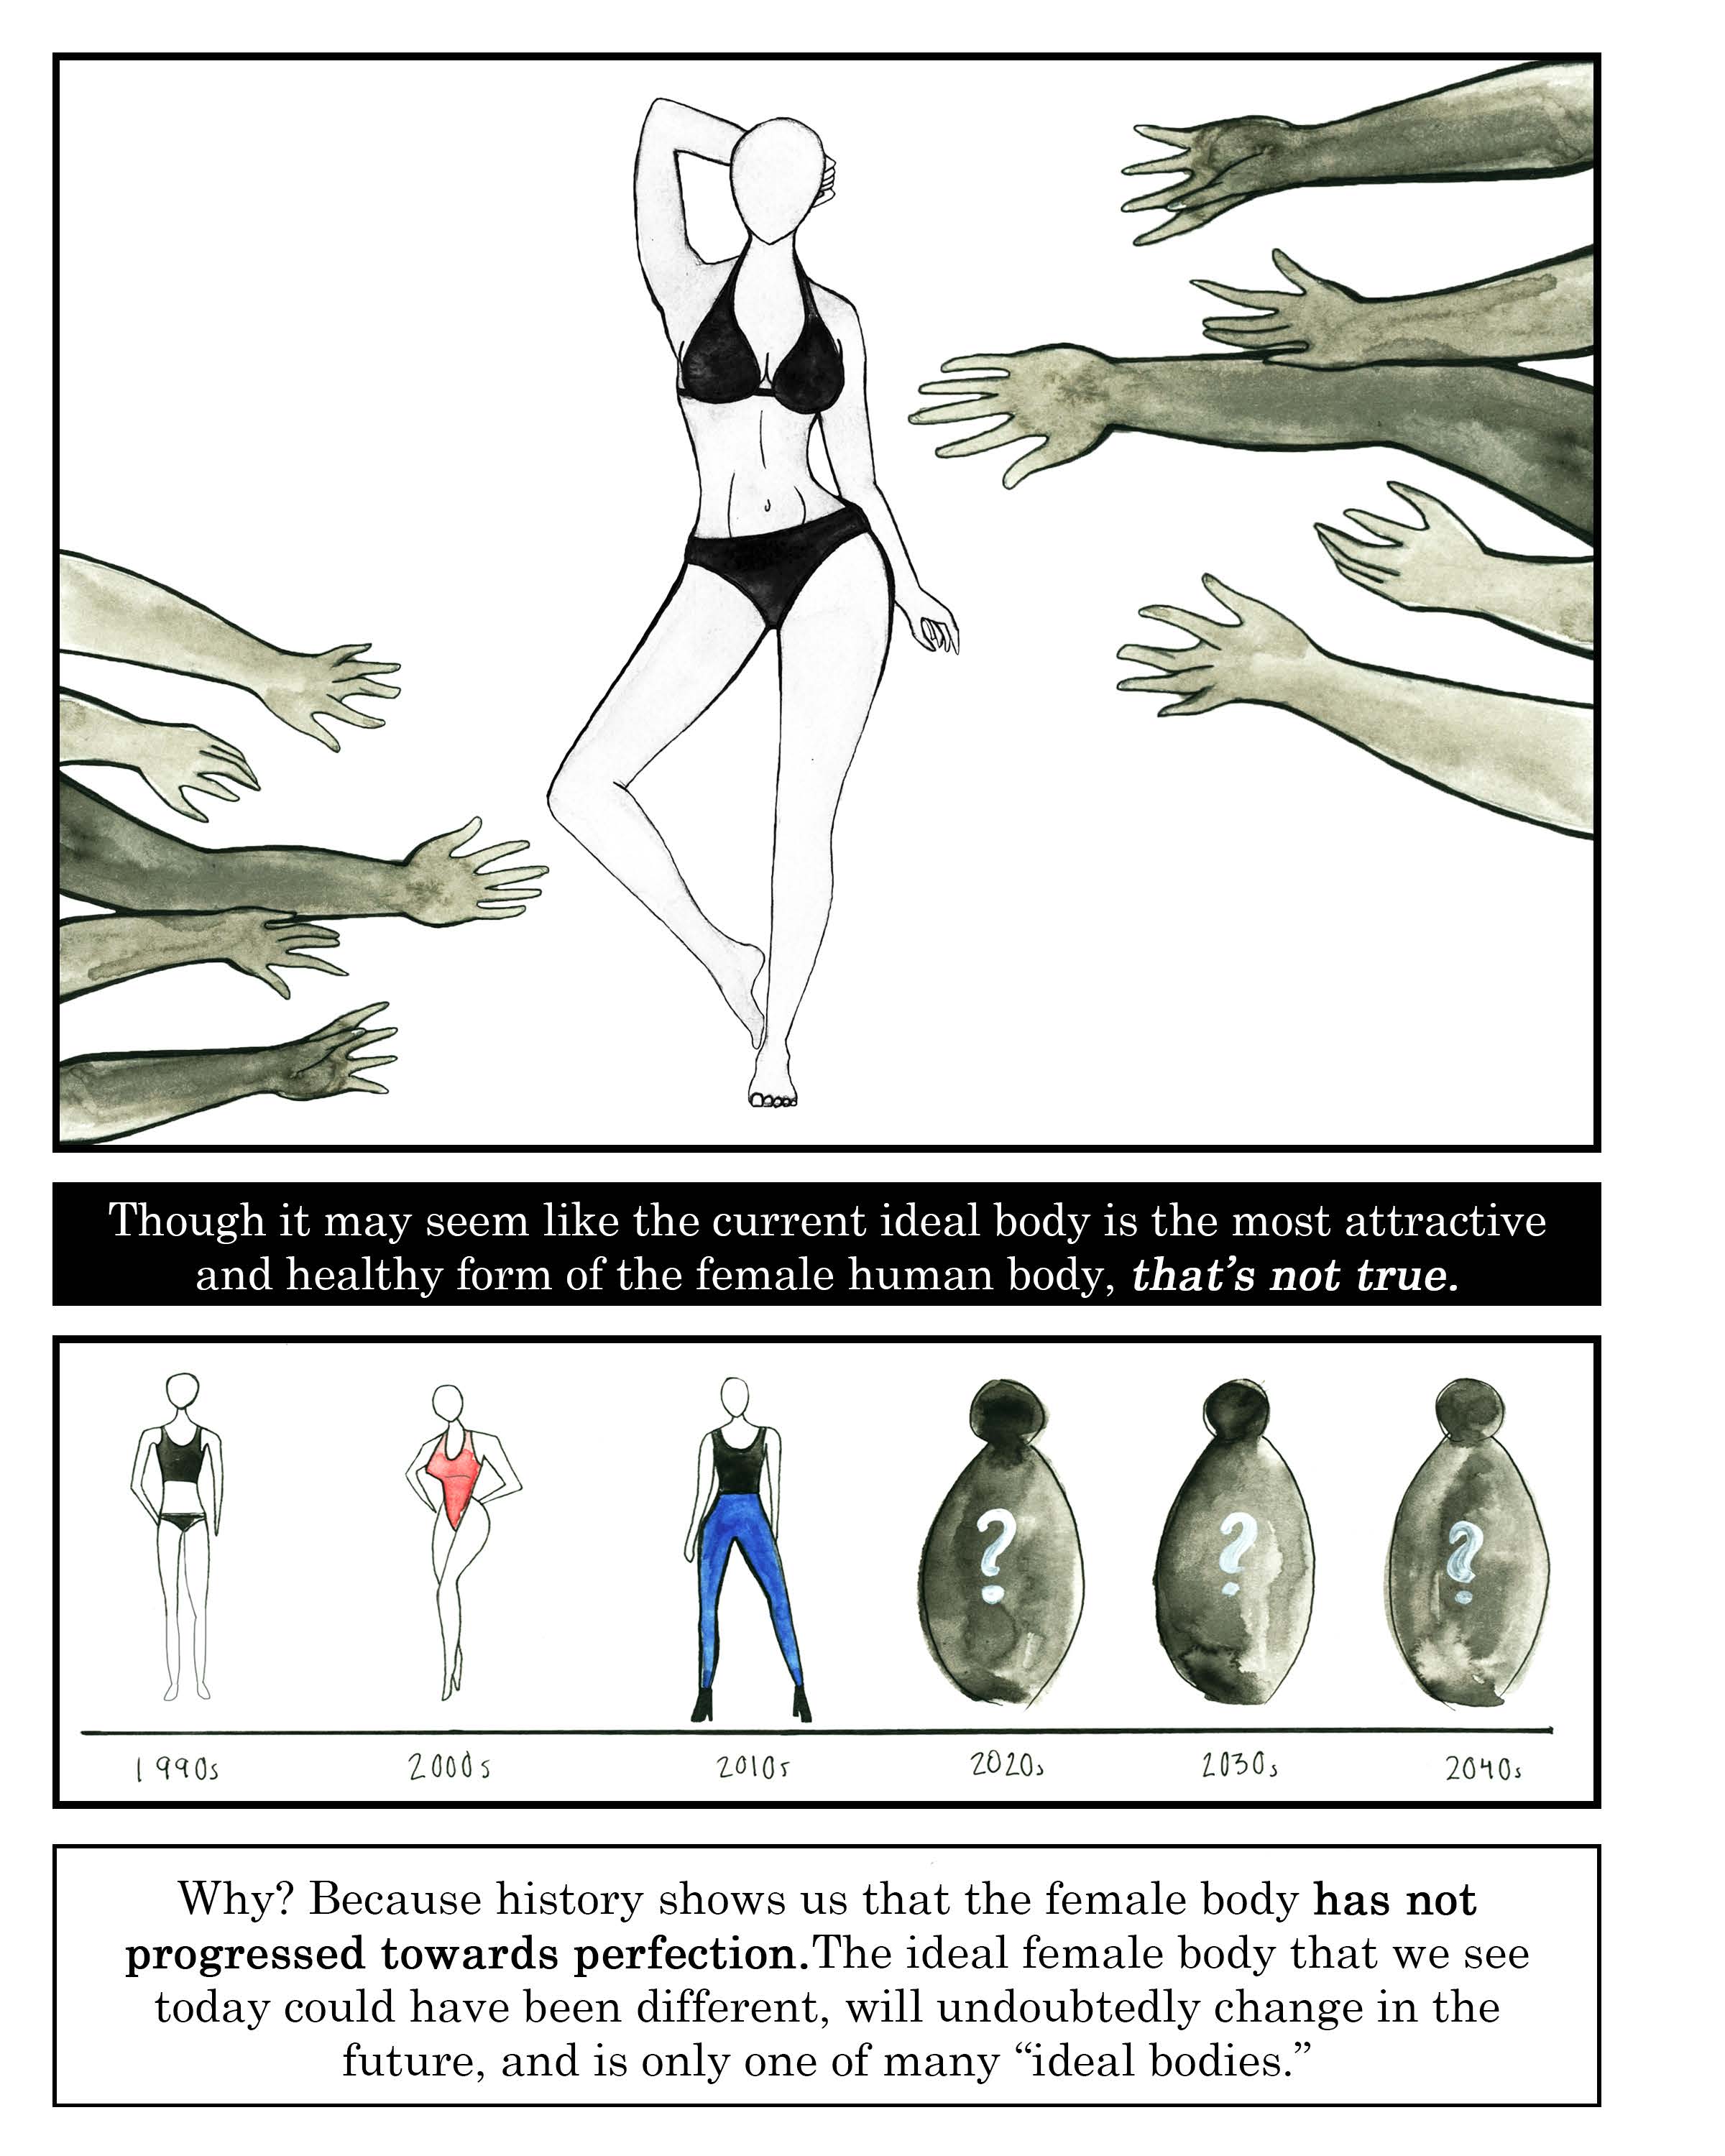 Women's Ideal Body Types Throughout History